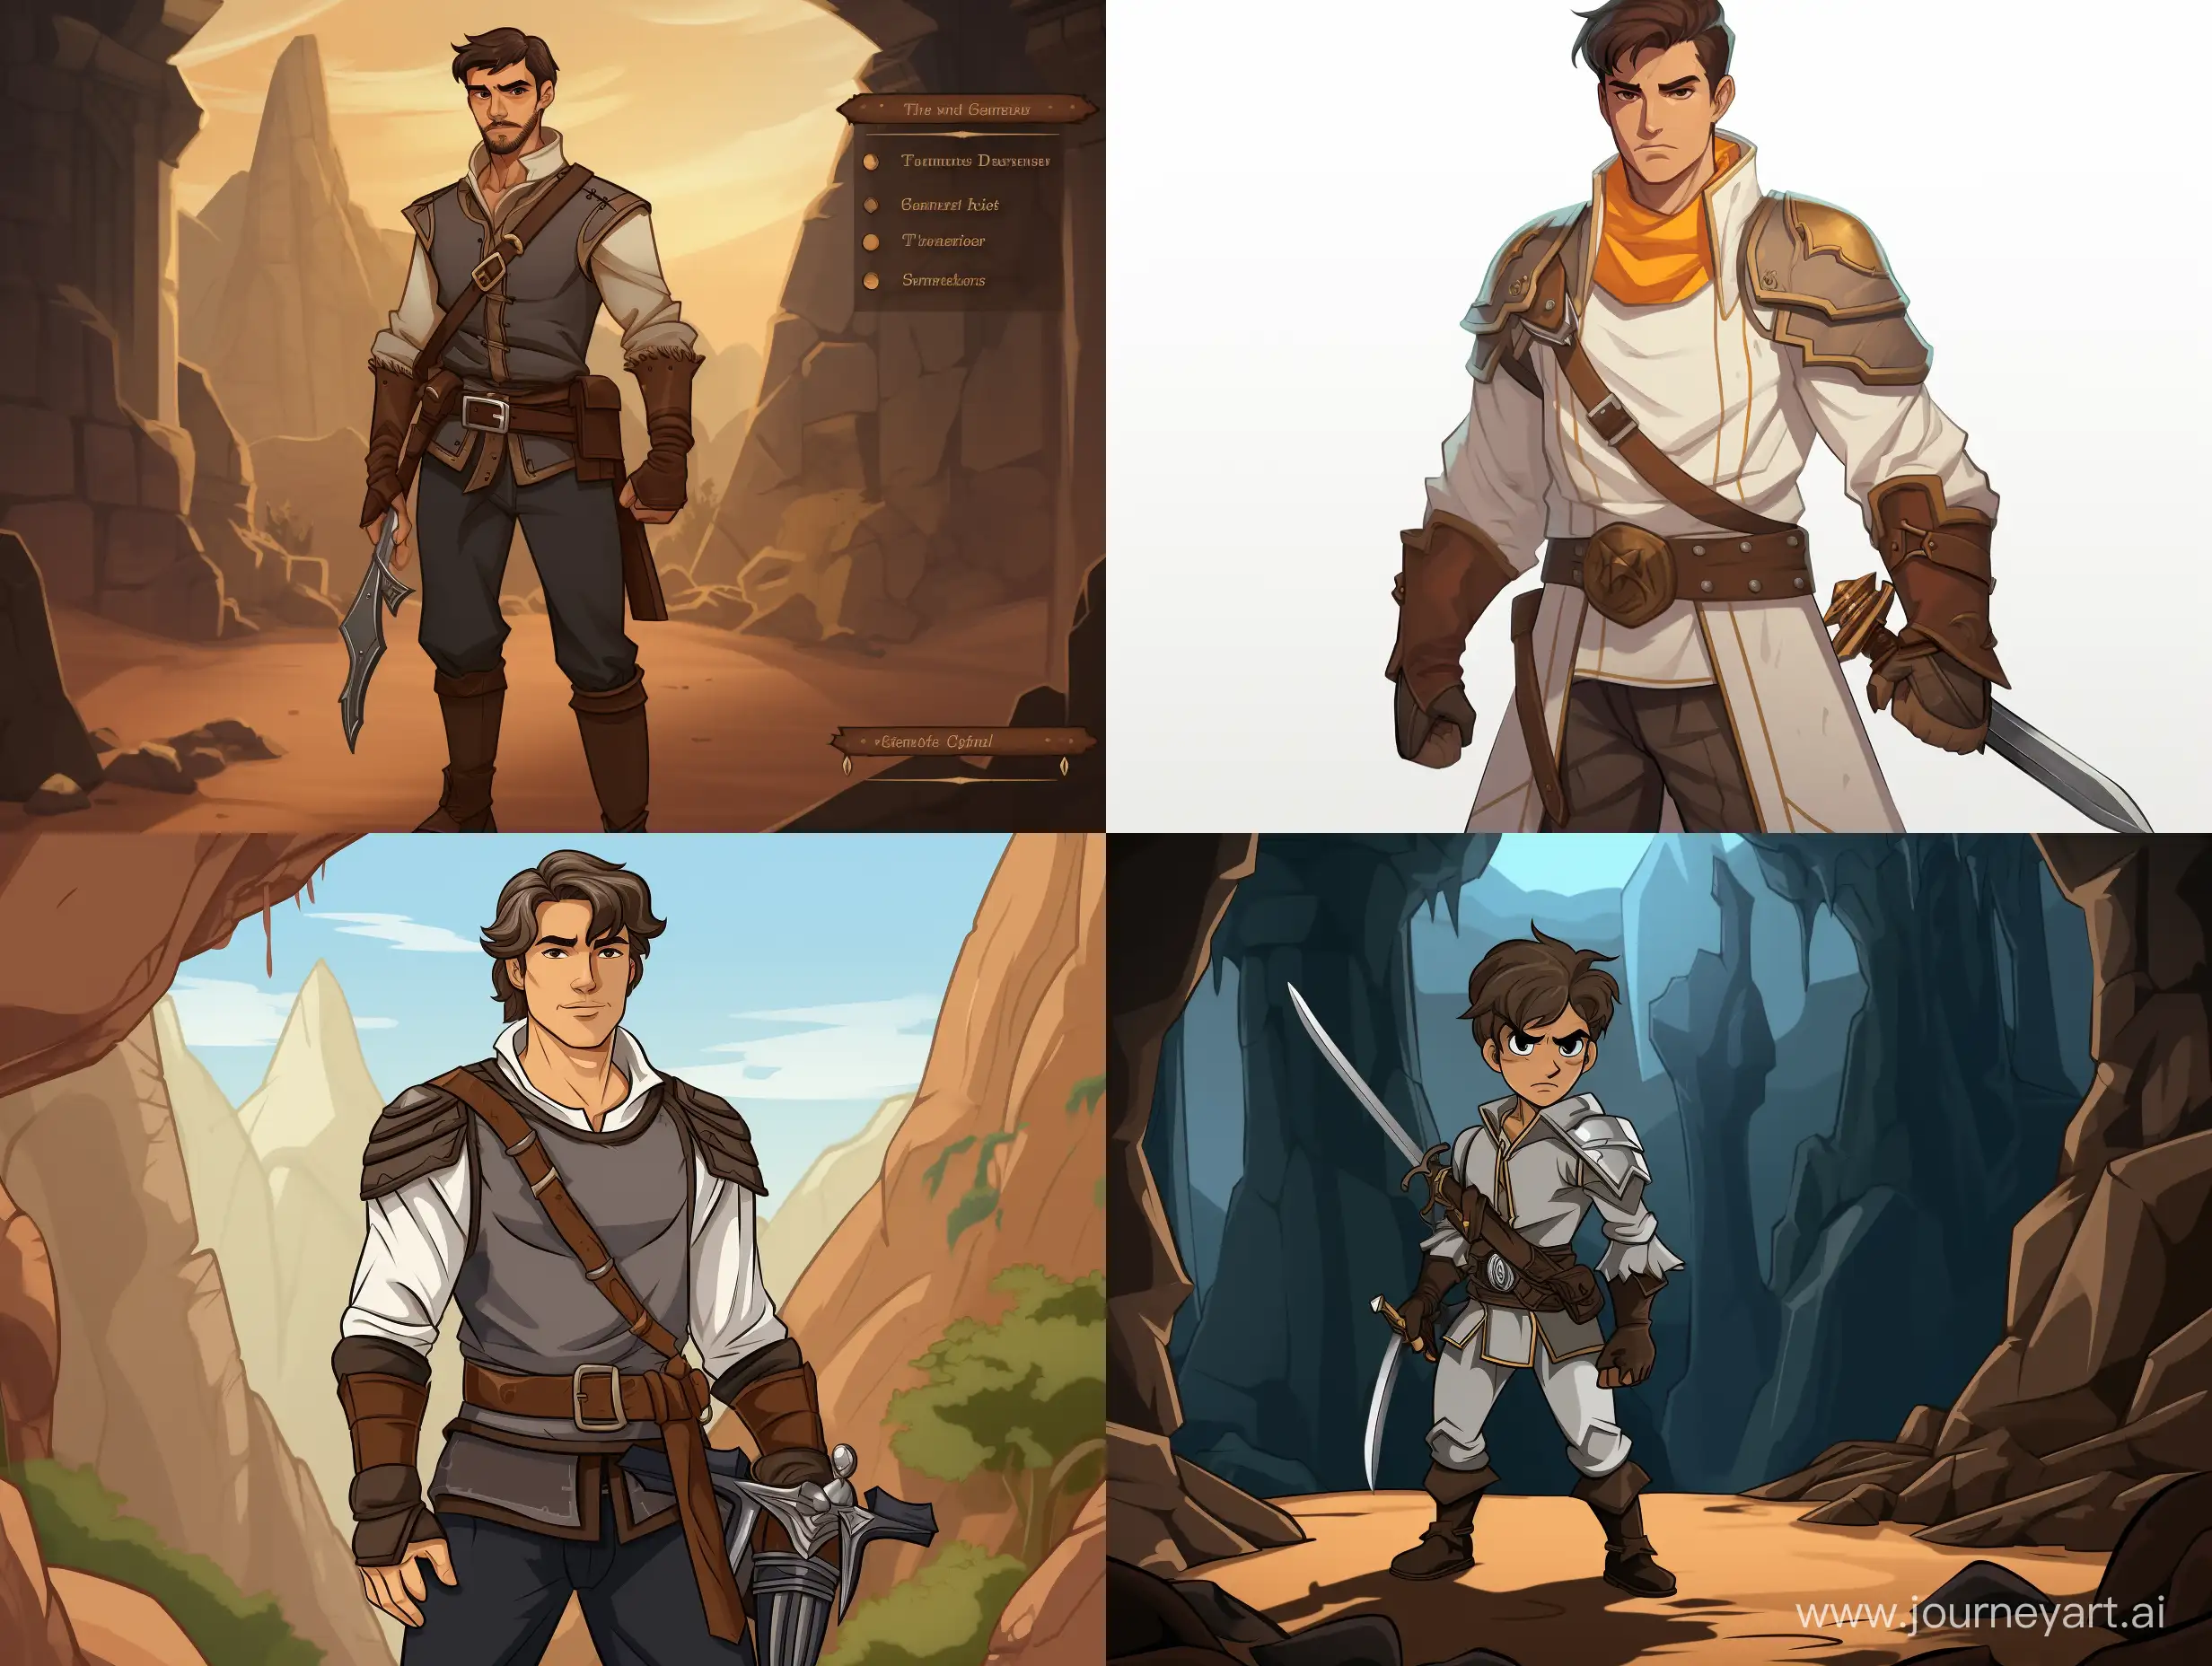 Mystical-Male-Adventurer-in-Dungeon-Exploration-with-Dagger-and-Pistol